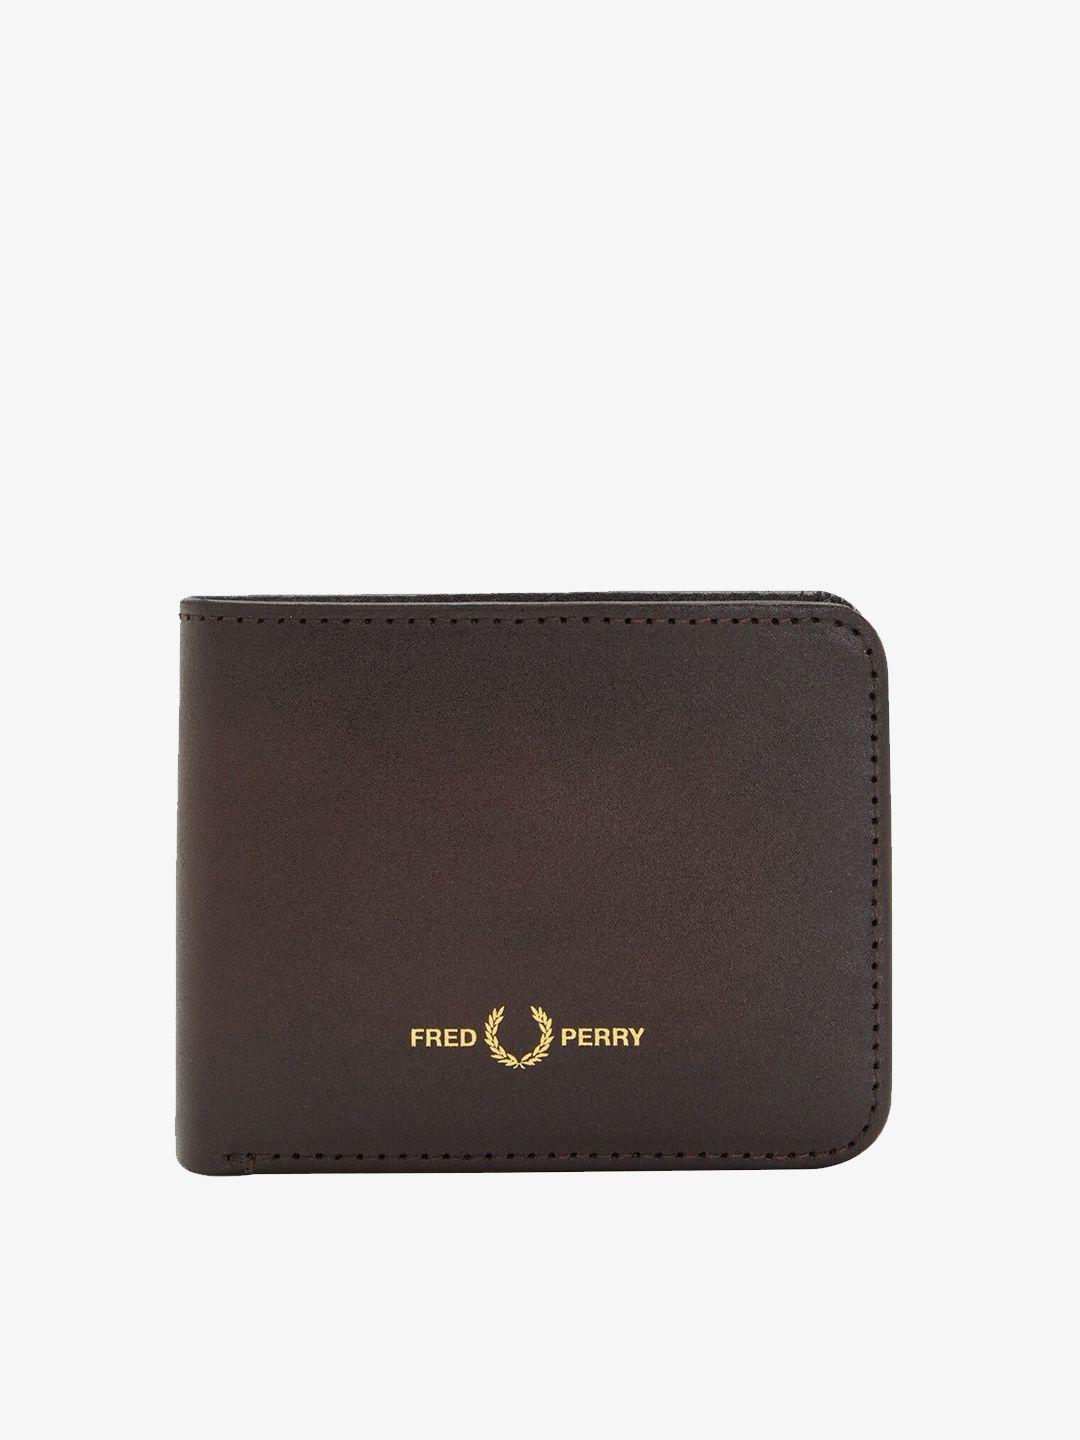 fred perry men leather two fold wallet